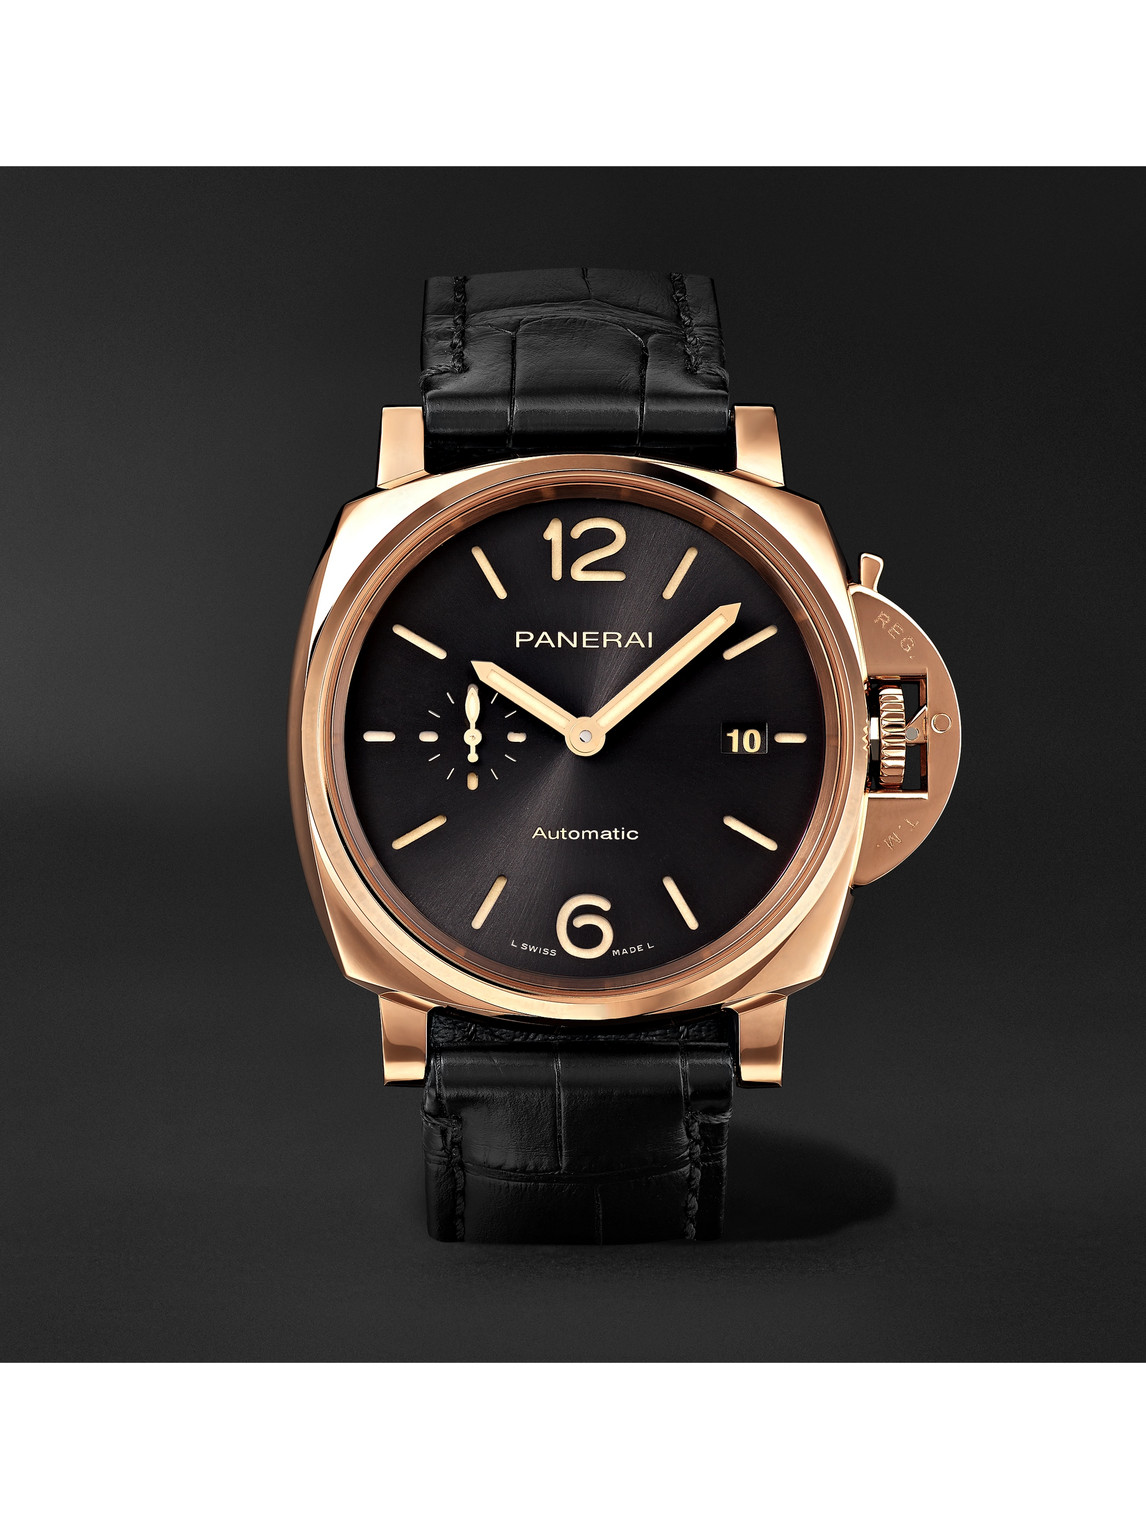 Luminor Due Automatic 42mm Goldtech and Alligator Watch, Ref. No. PAM01041